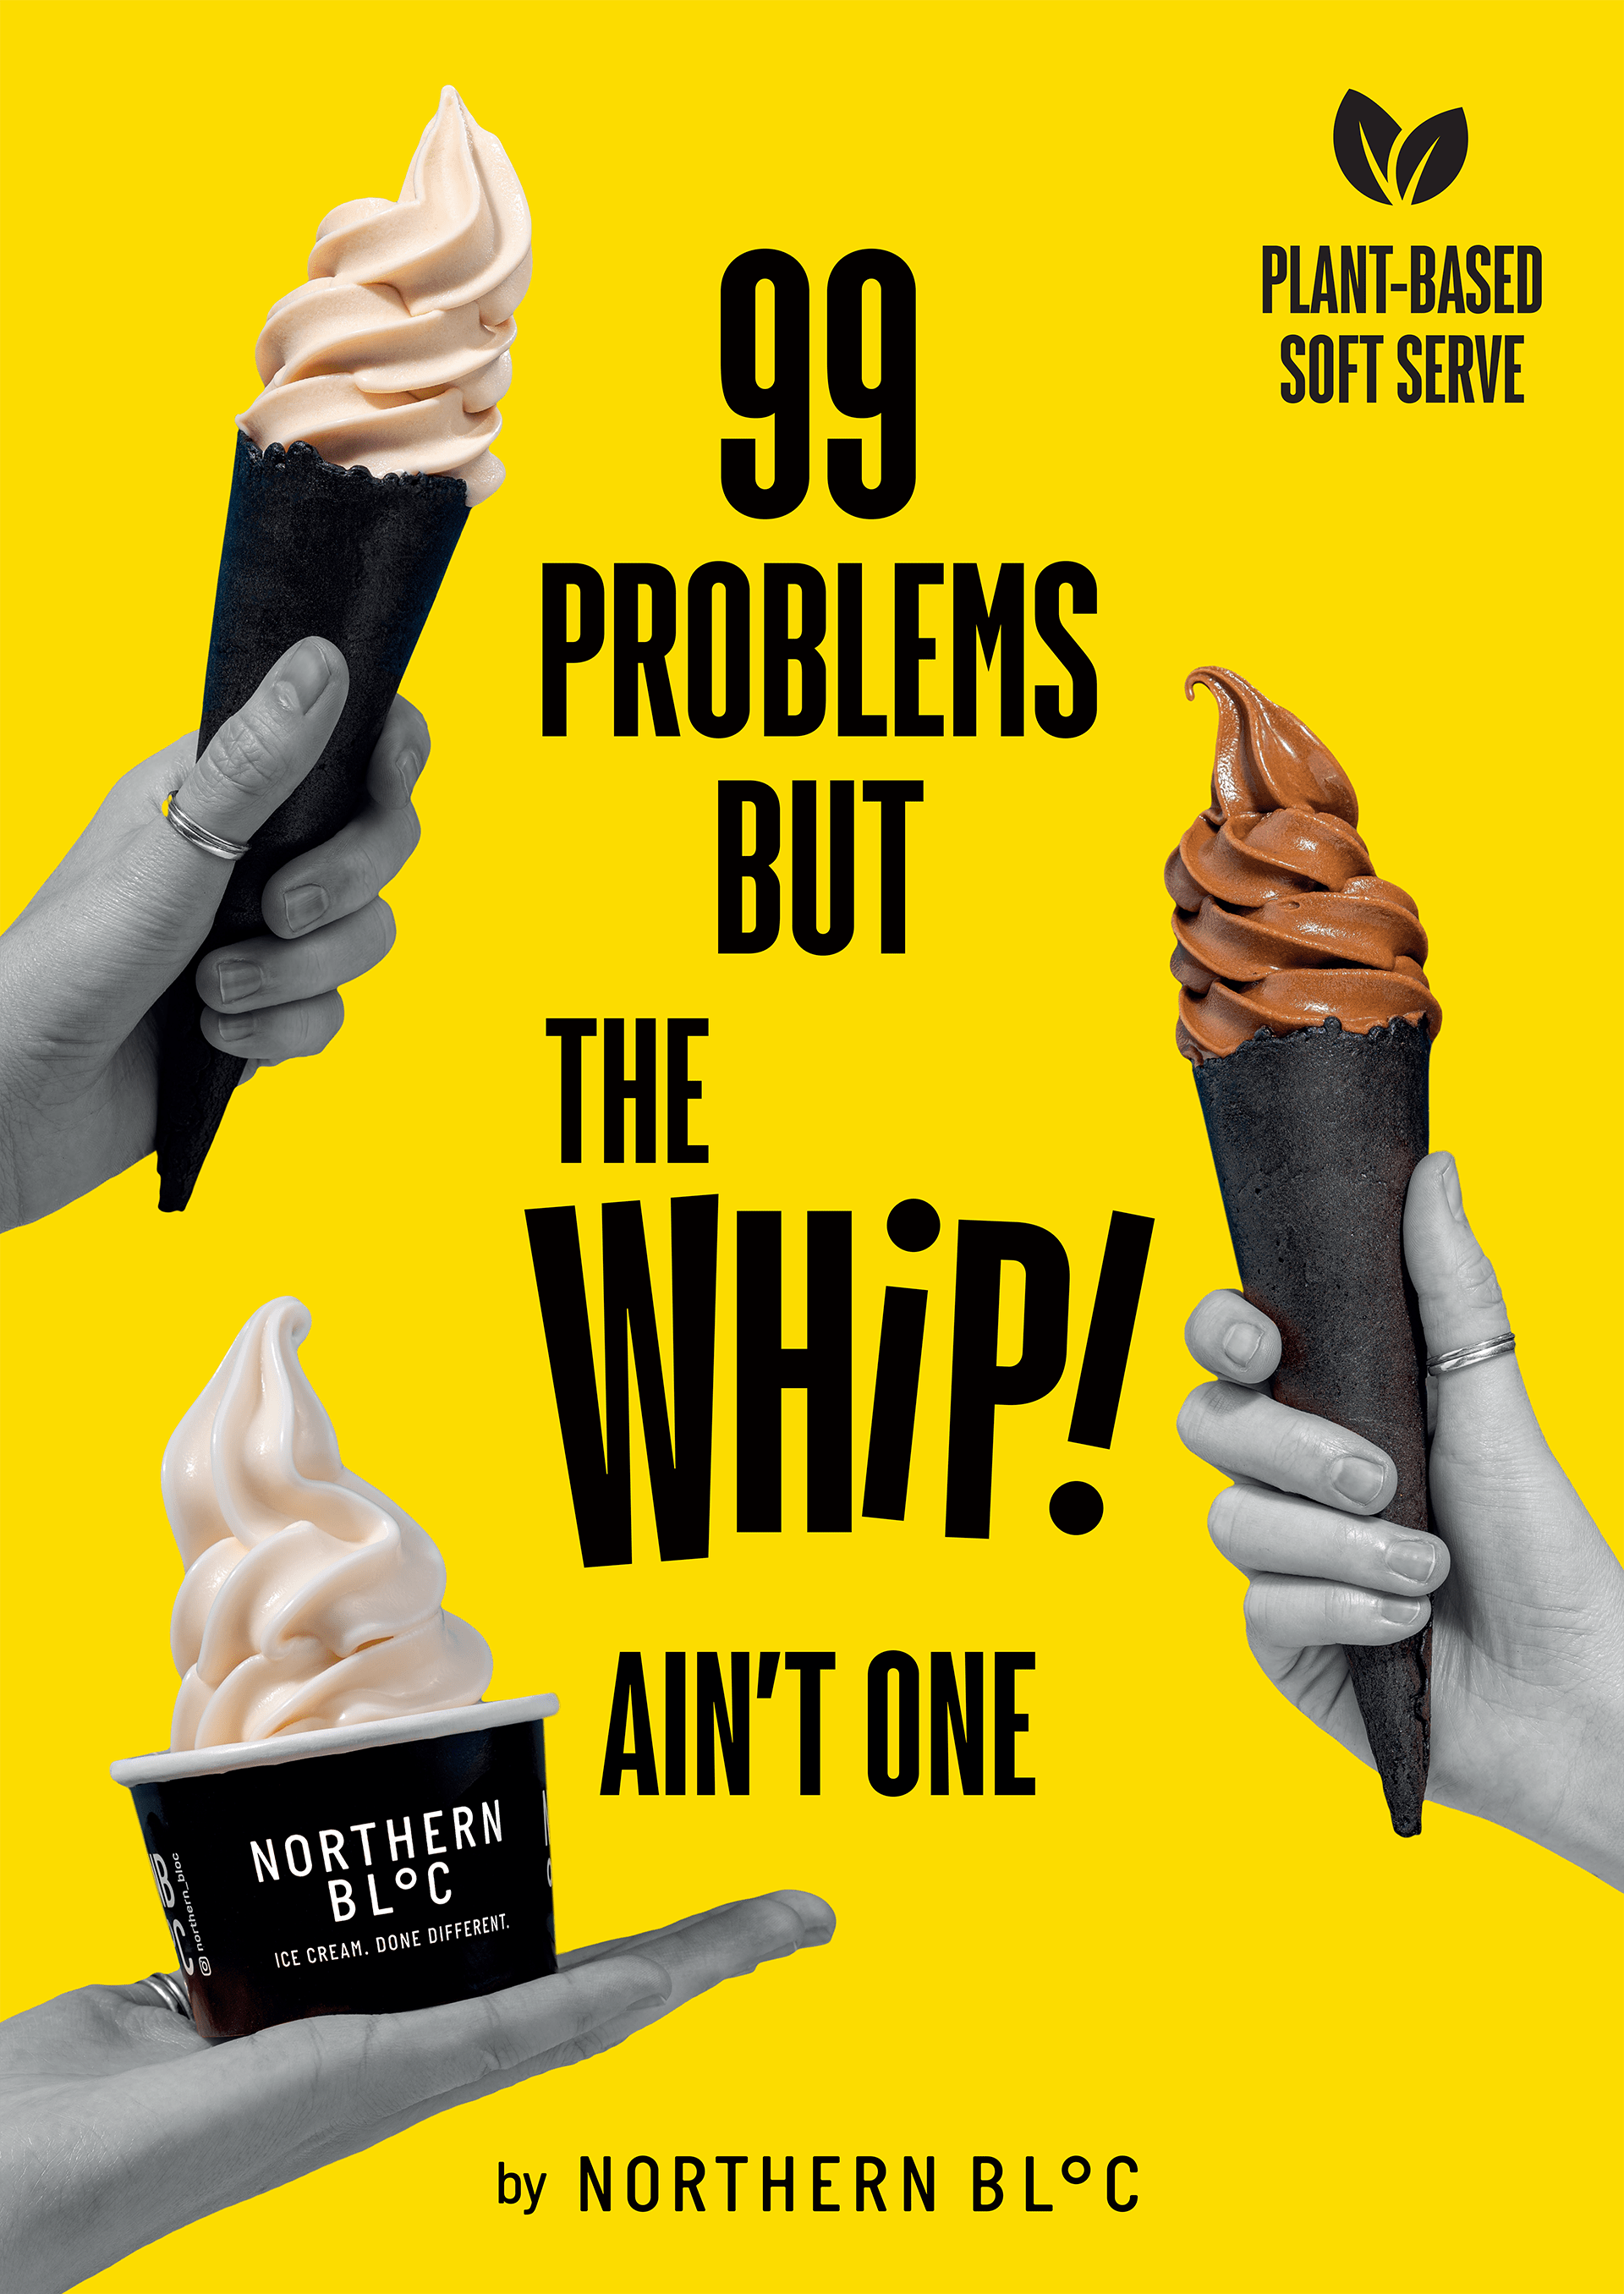 99 Problems but the Whip 'aint one